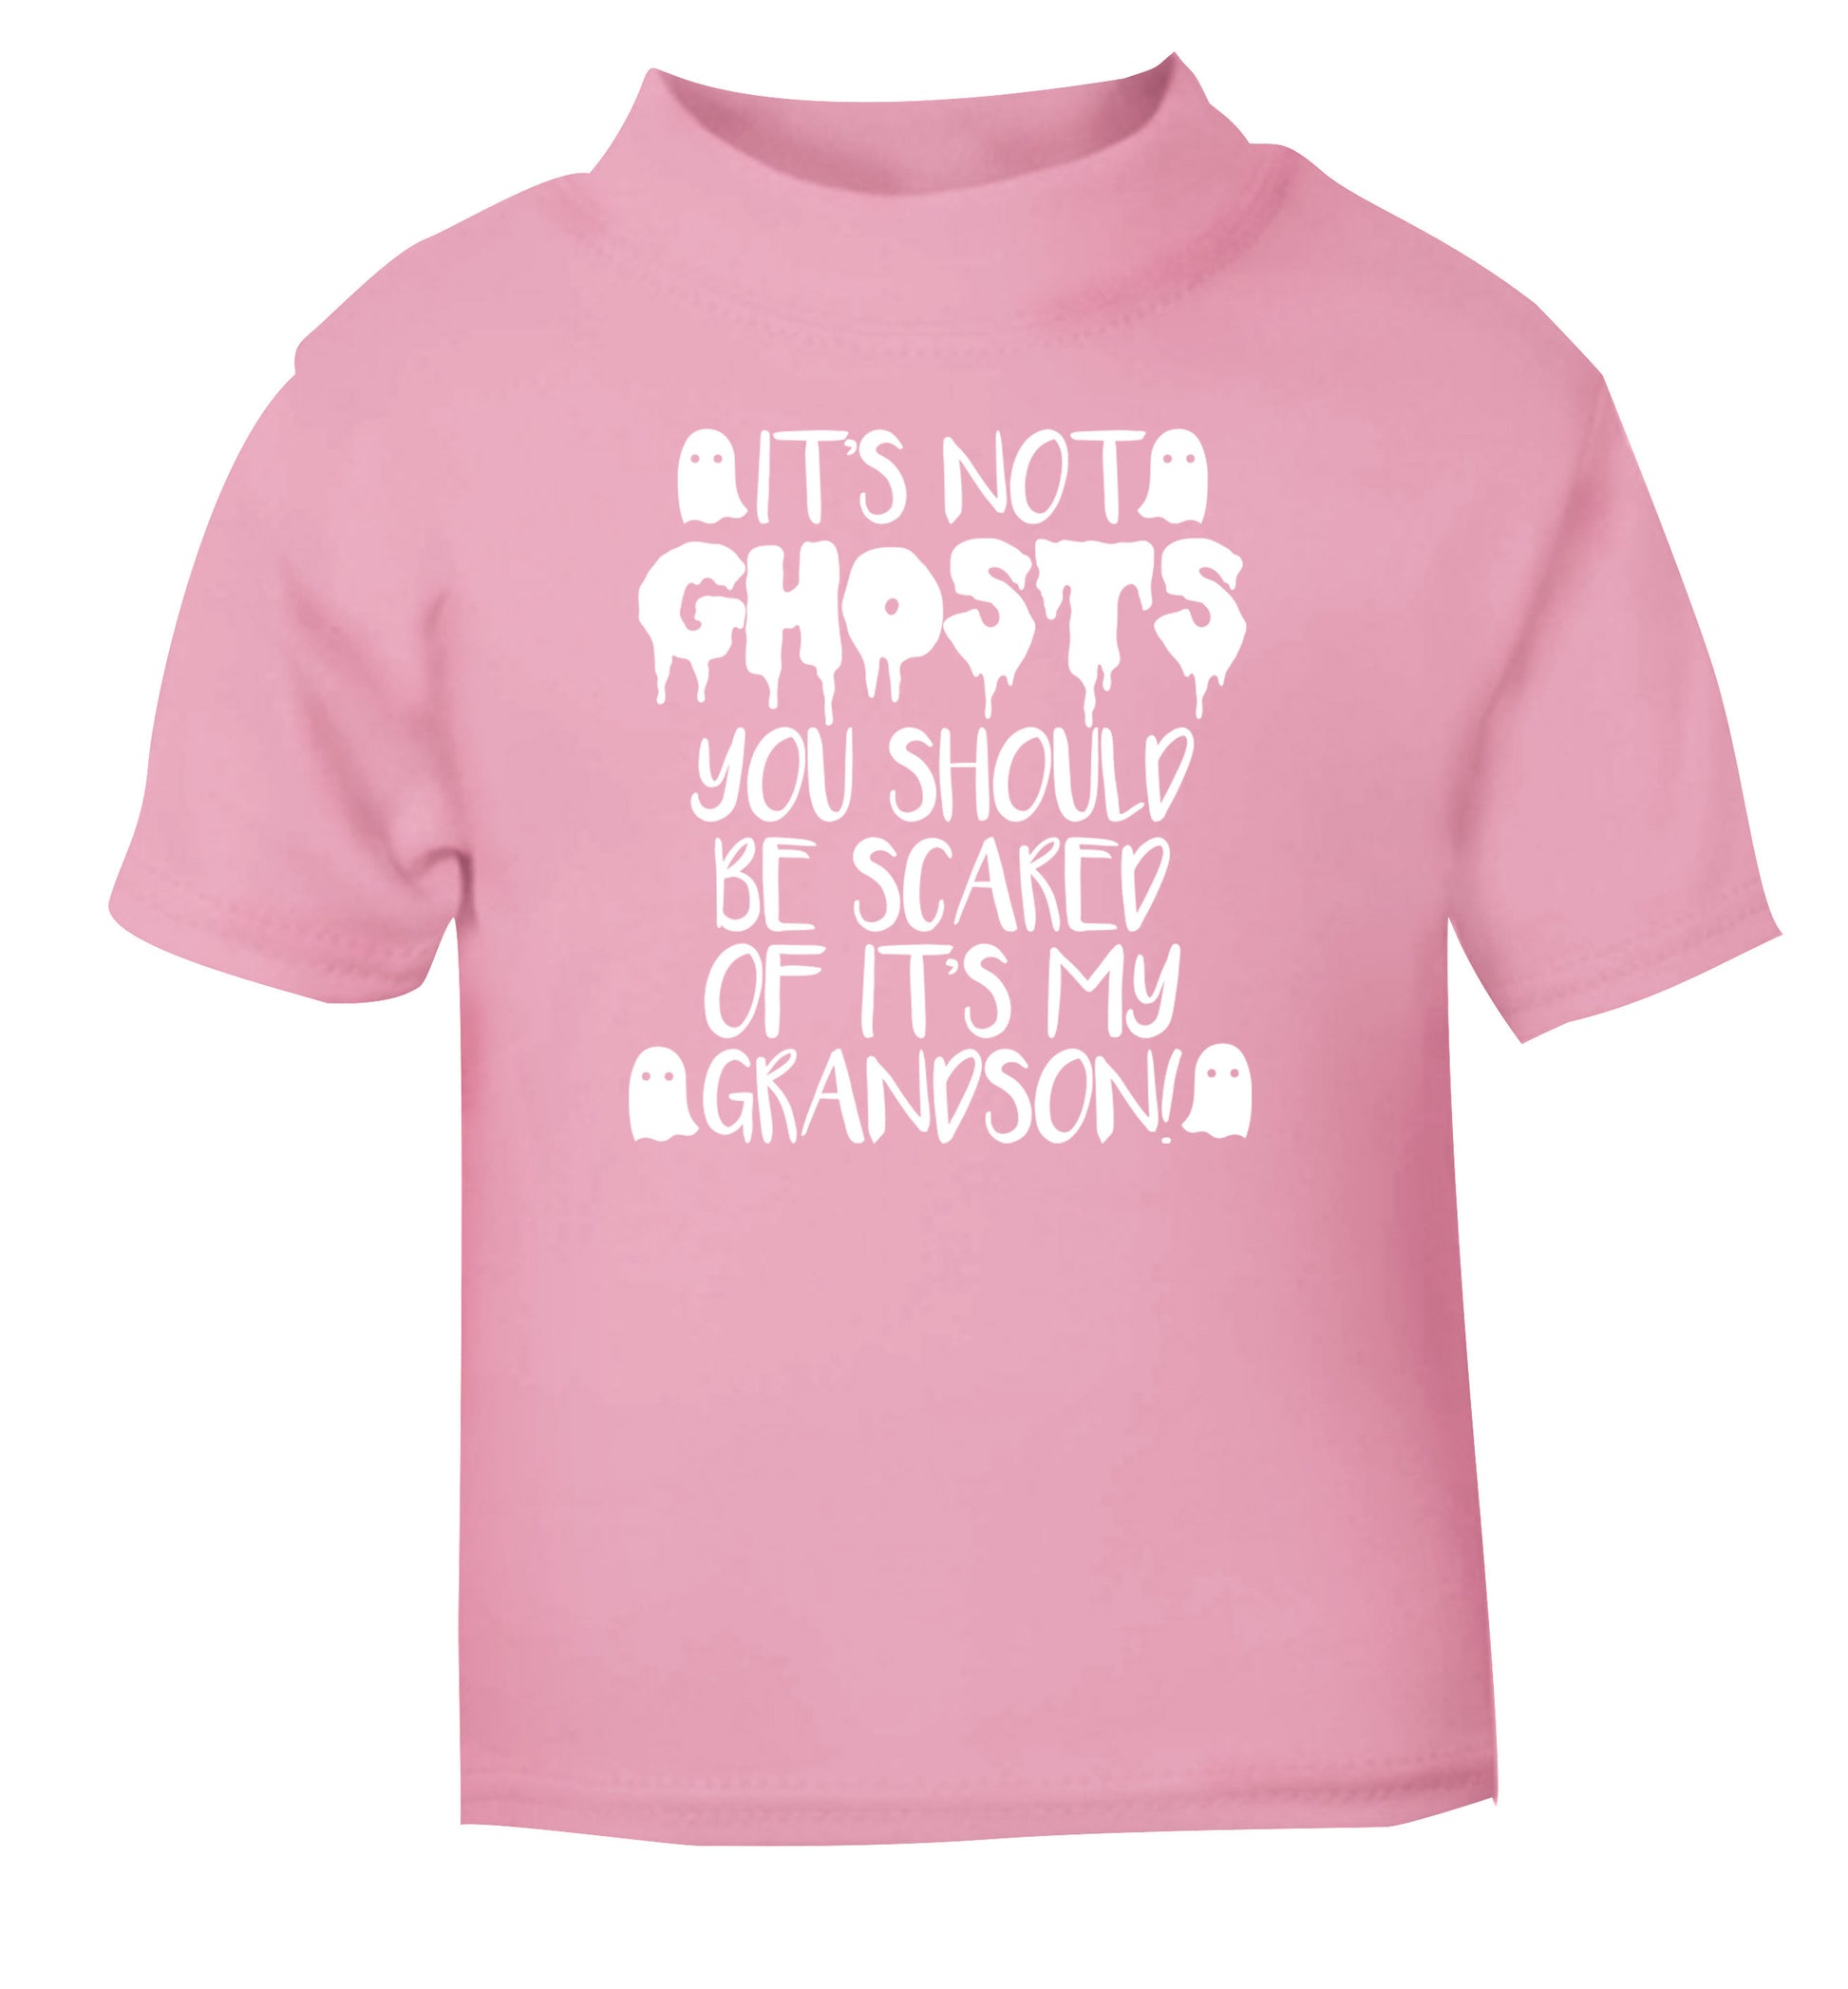 It's not ghosts you should be scared of it's my grandson! light pink Baby Toddler Tshirt 2 Years